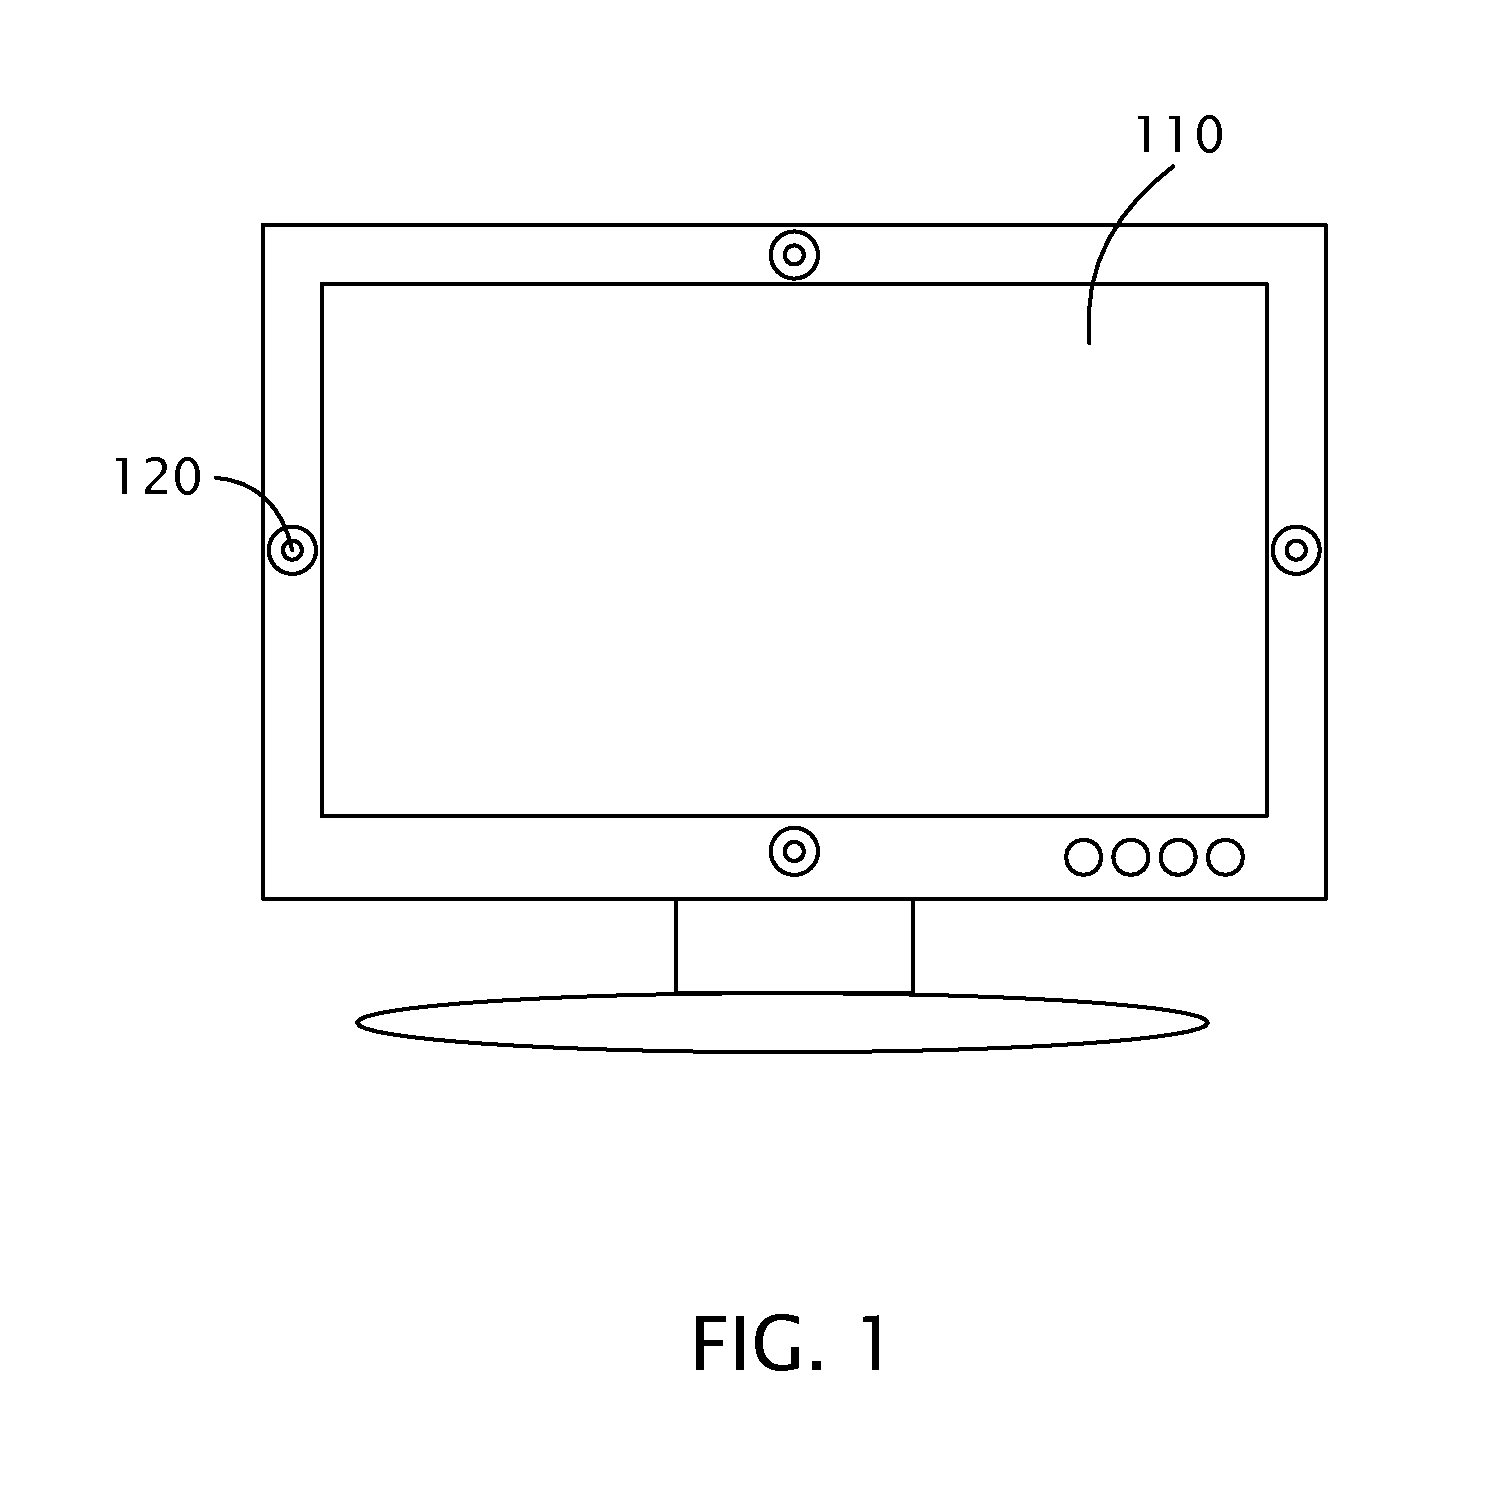 Video instant messaging system and method thereof